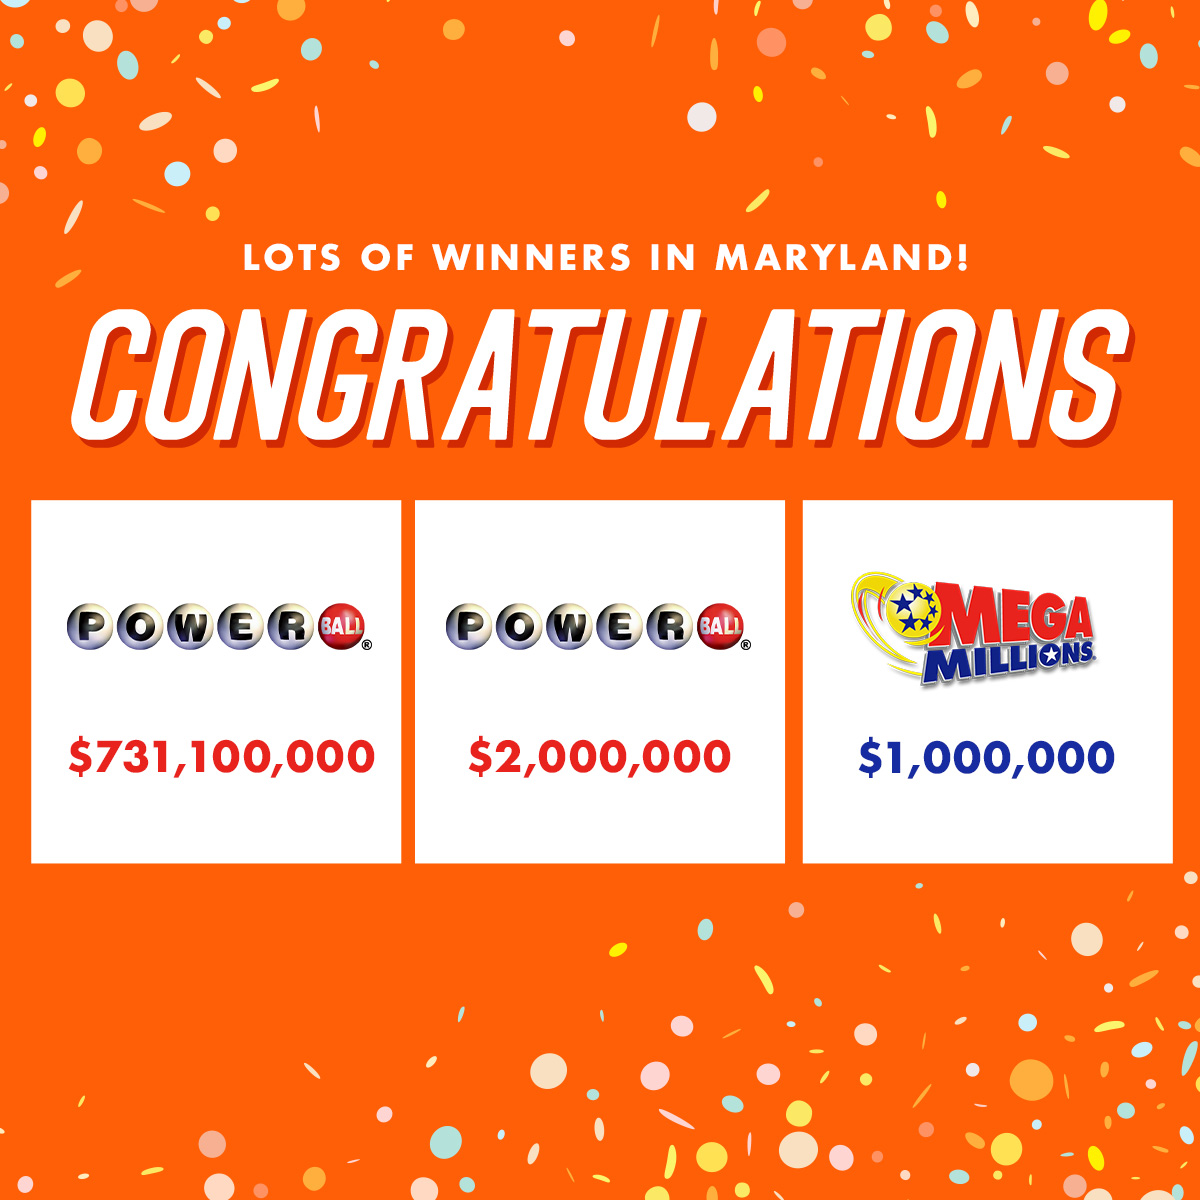 Congratulations to our big Maryland winners! 
Learn more about all of our winners from last week, who won a total of $32.2 million, in addition to the $731.1 million Powerball jackpot: https://t.co/QHDCz732O1 https://t.co/xbiypgkjBi